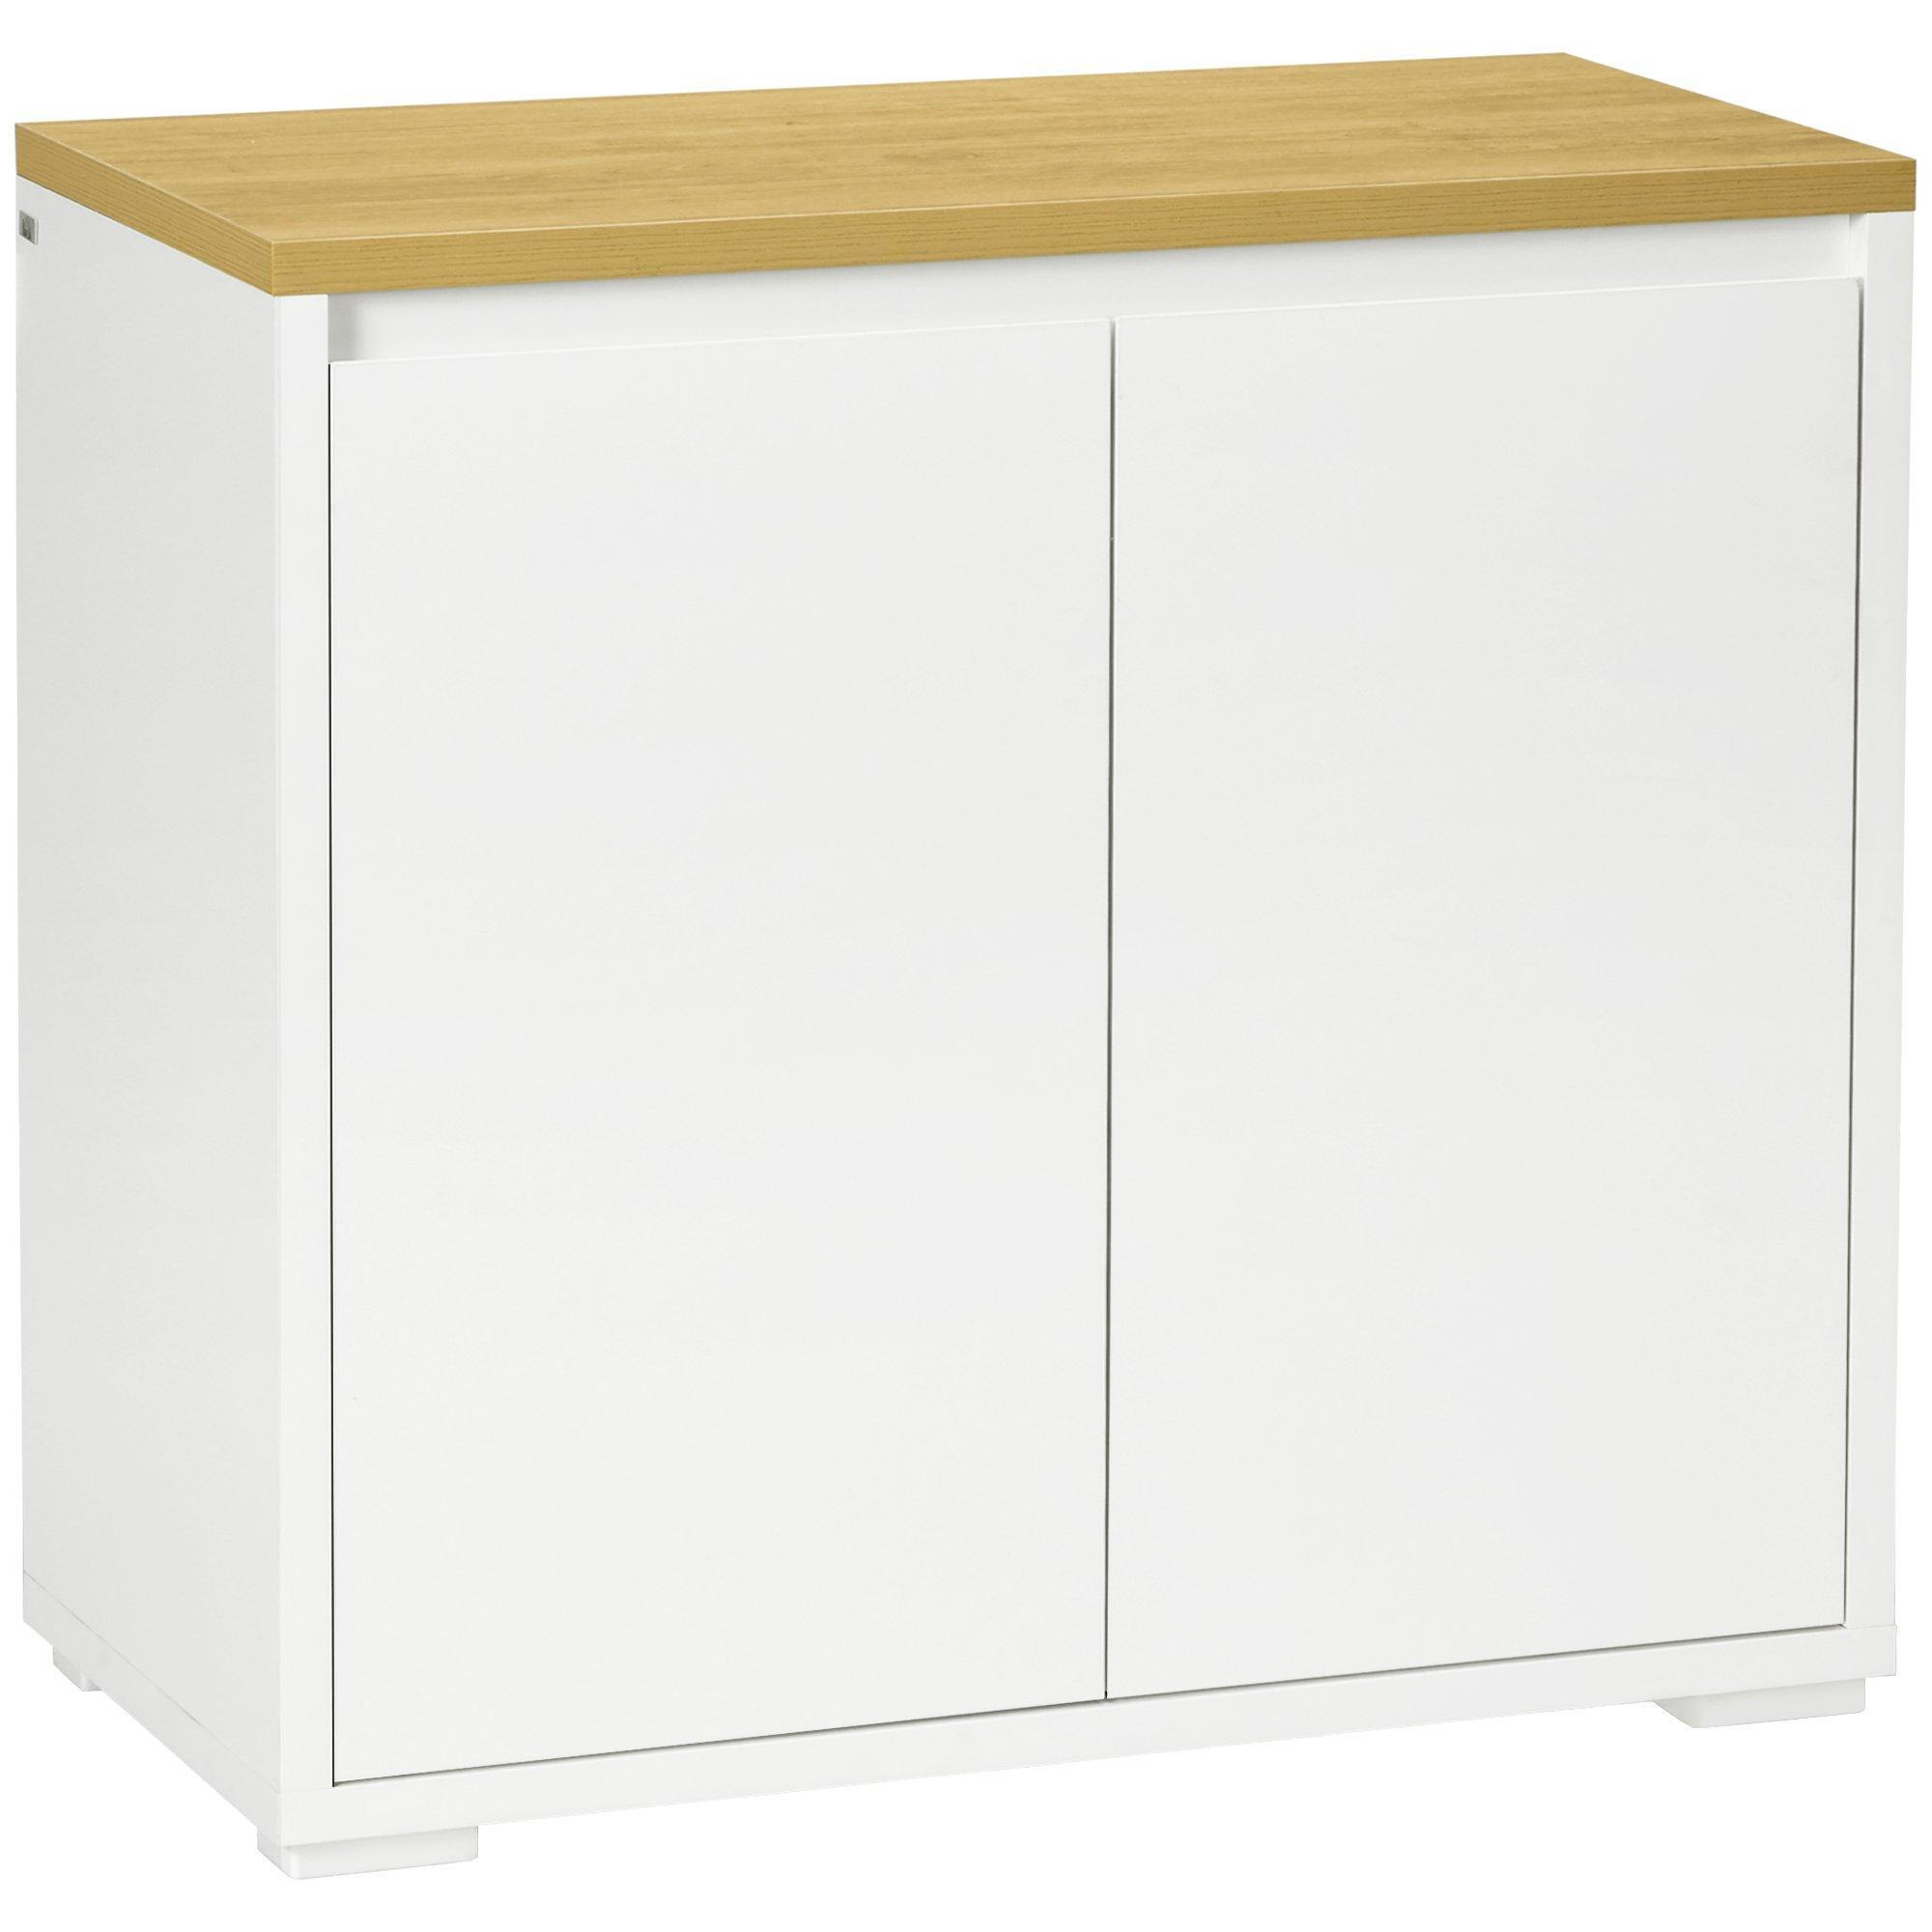 Kitchen Sideboard Storage Cabinet with Double Doors and Shelf - image 1